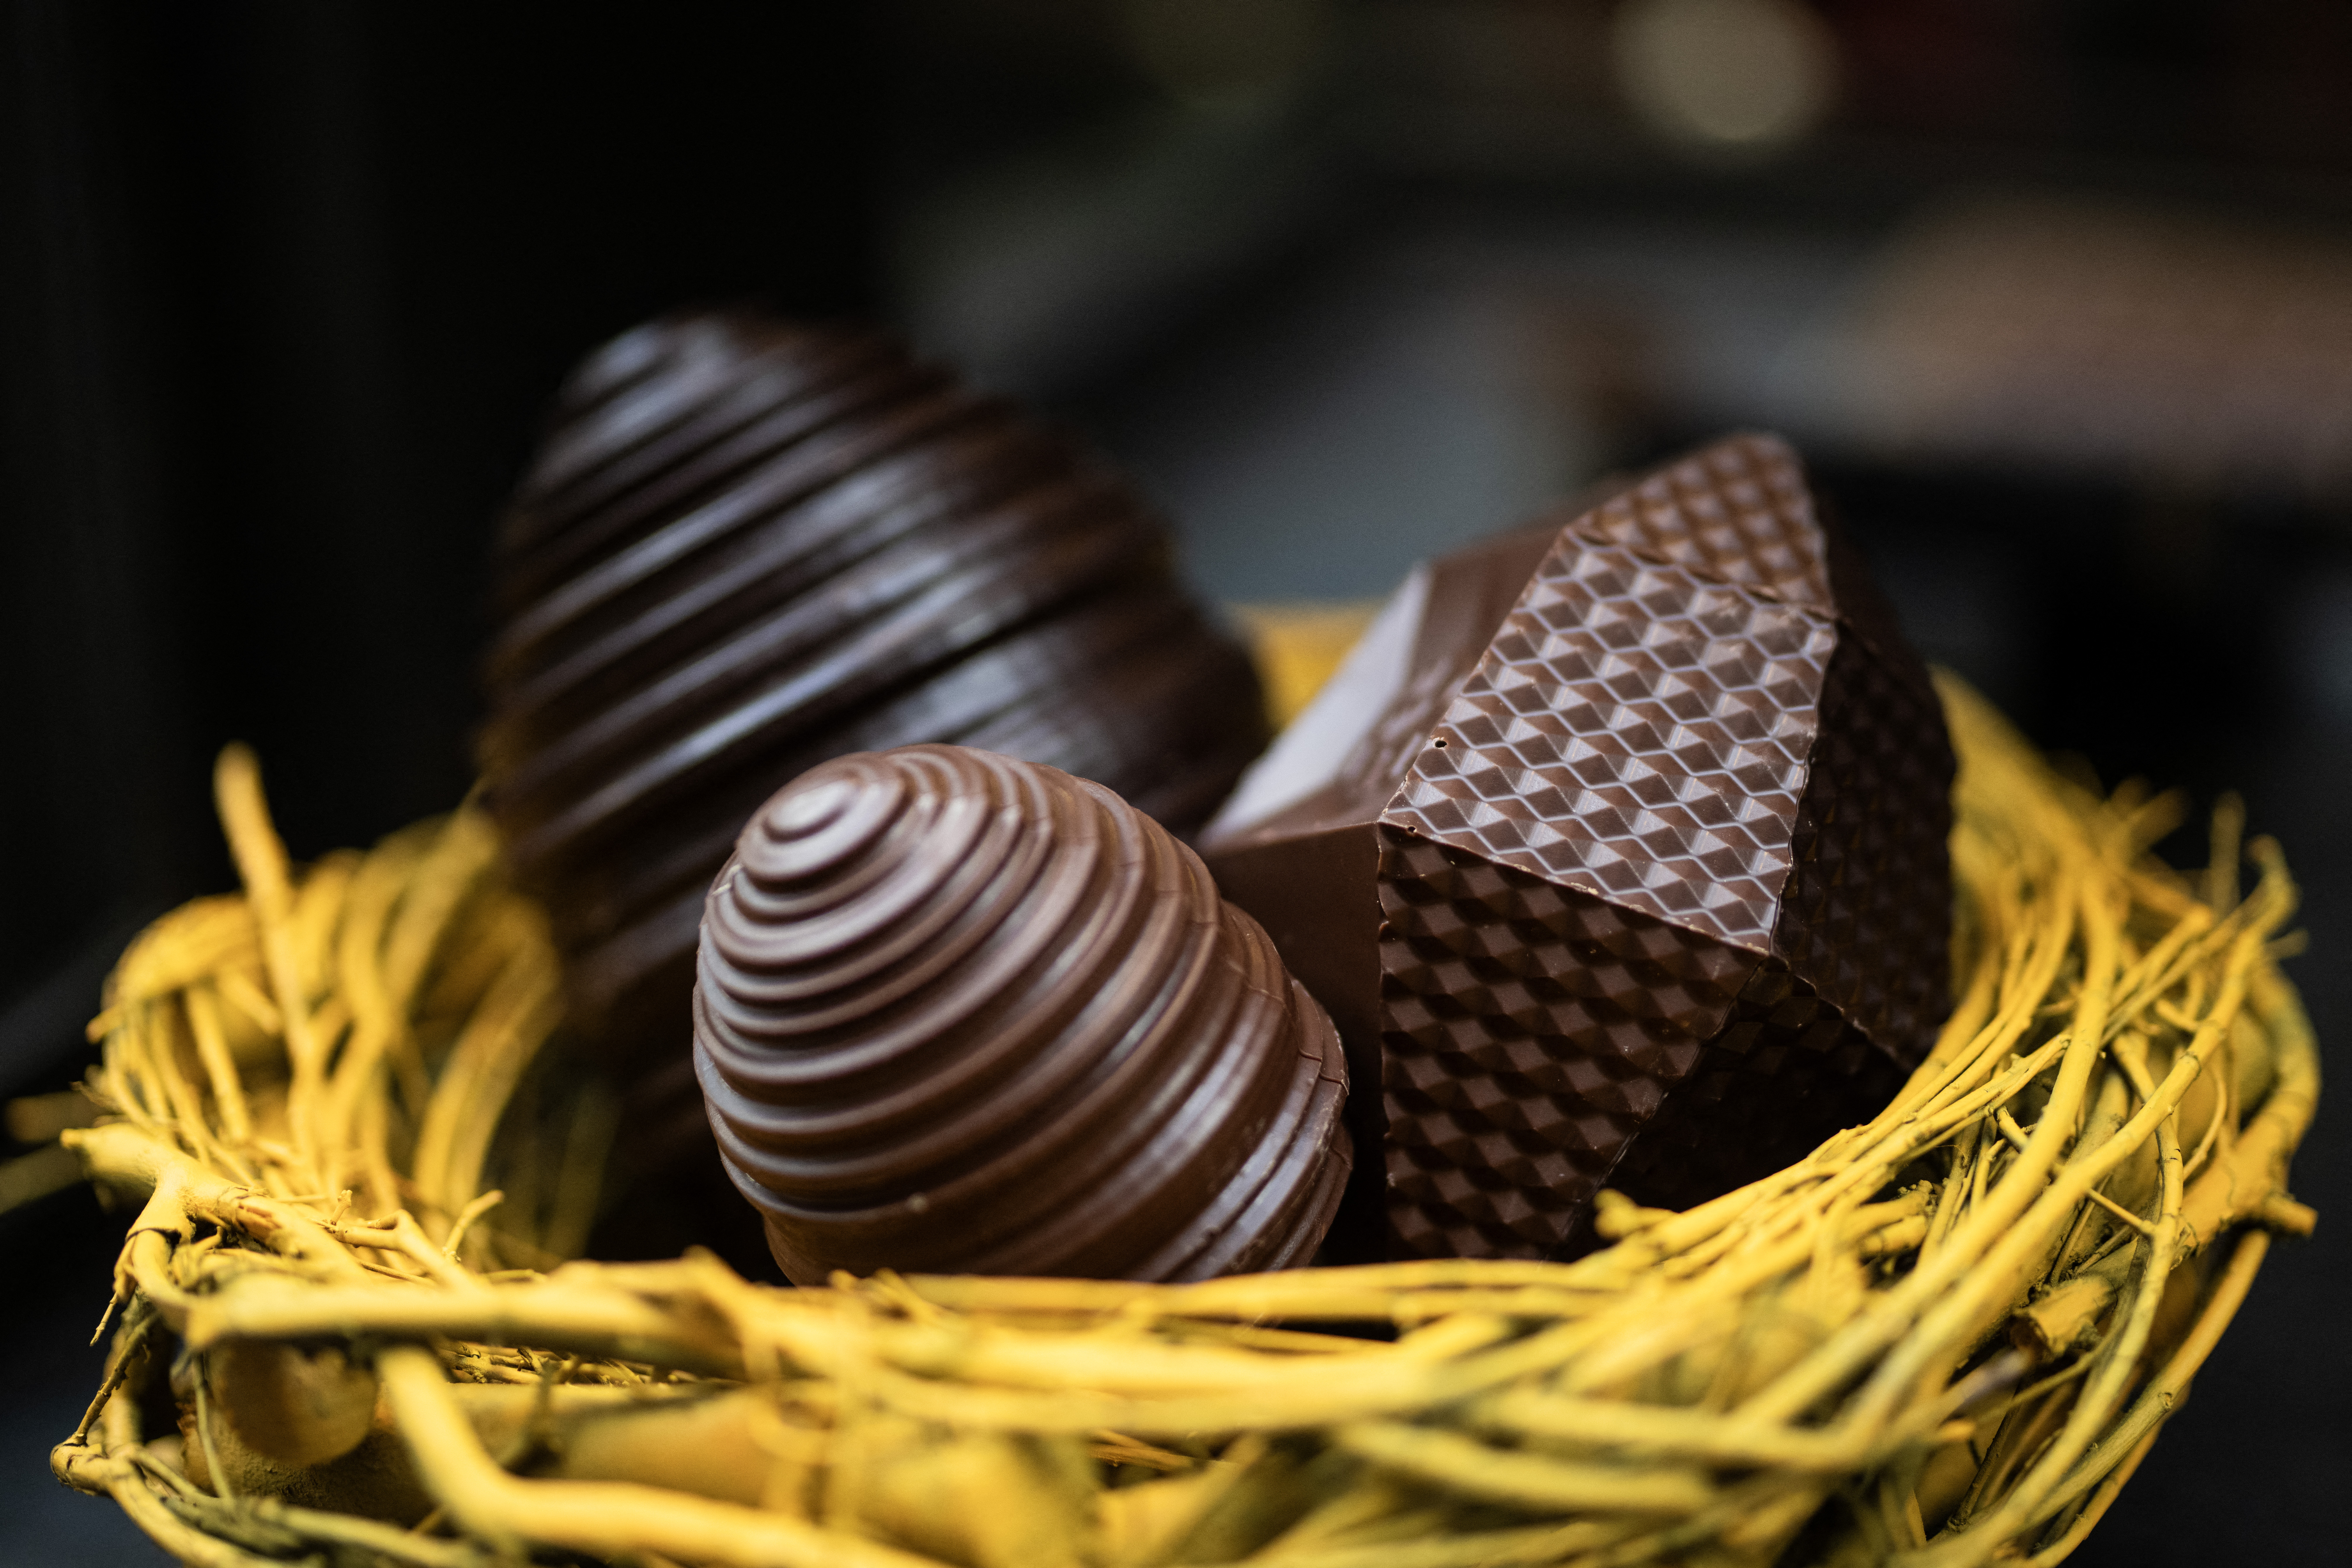 Higher chocolate prices this Easter amid cocoa supply disruptions